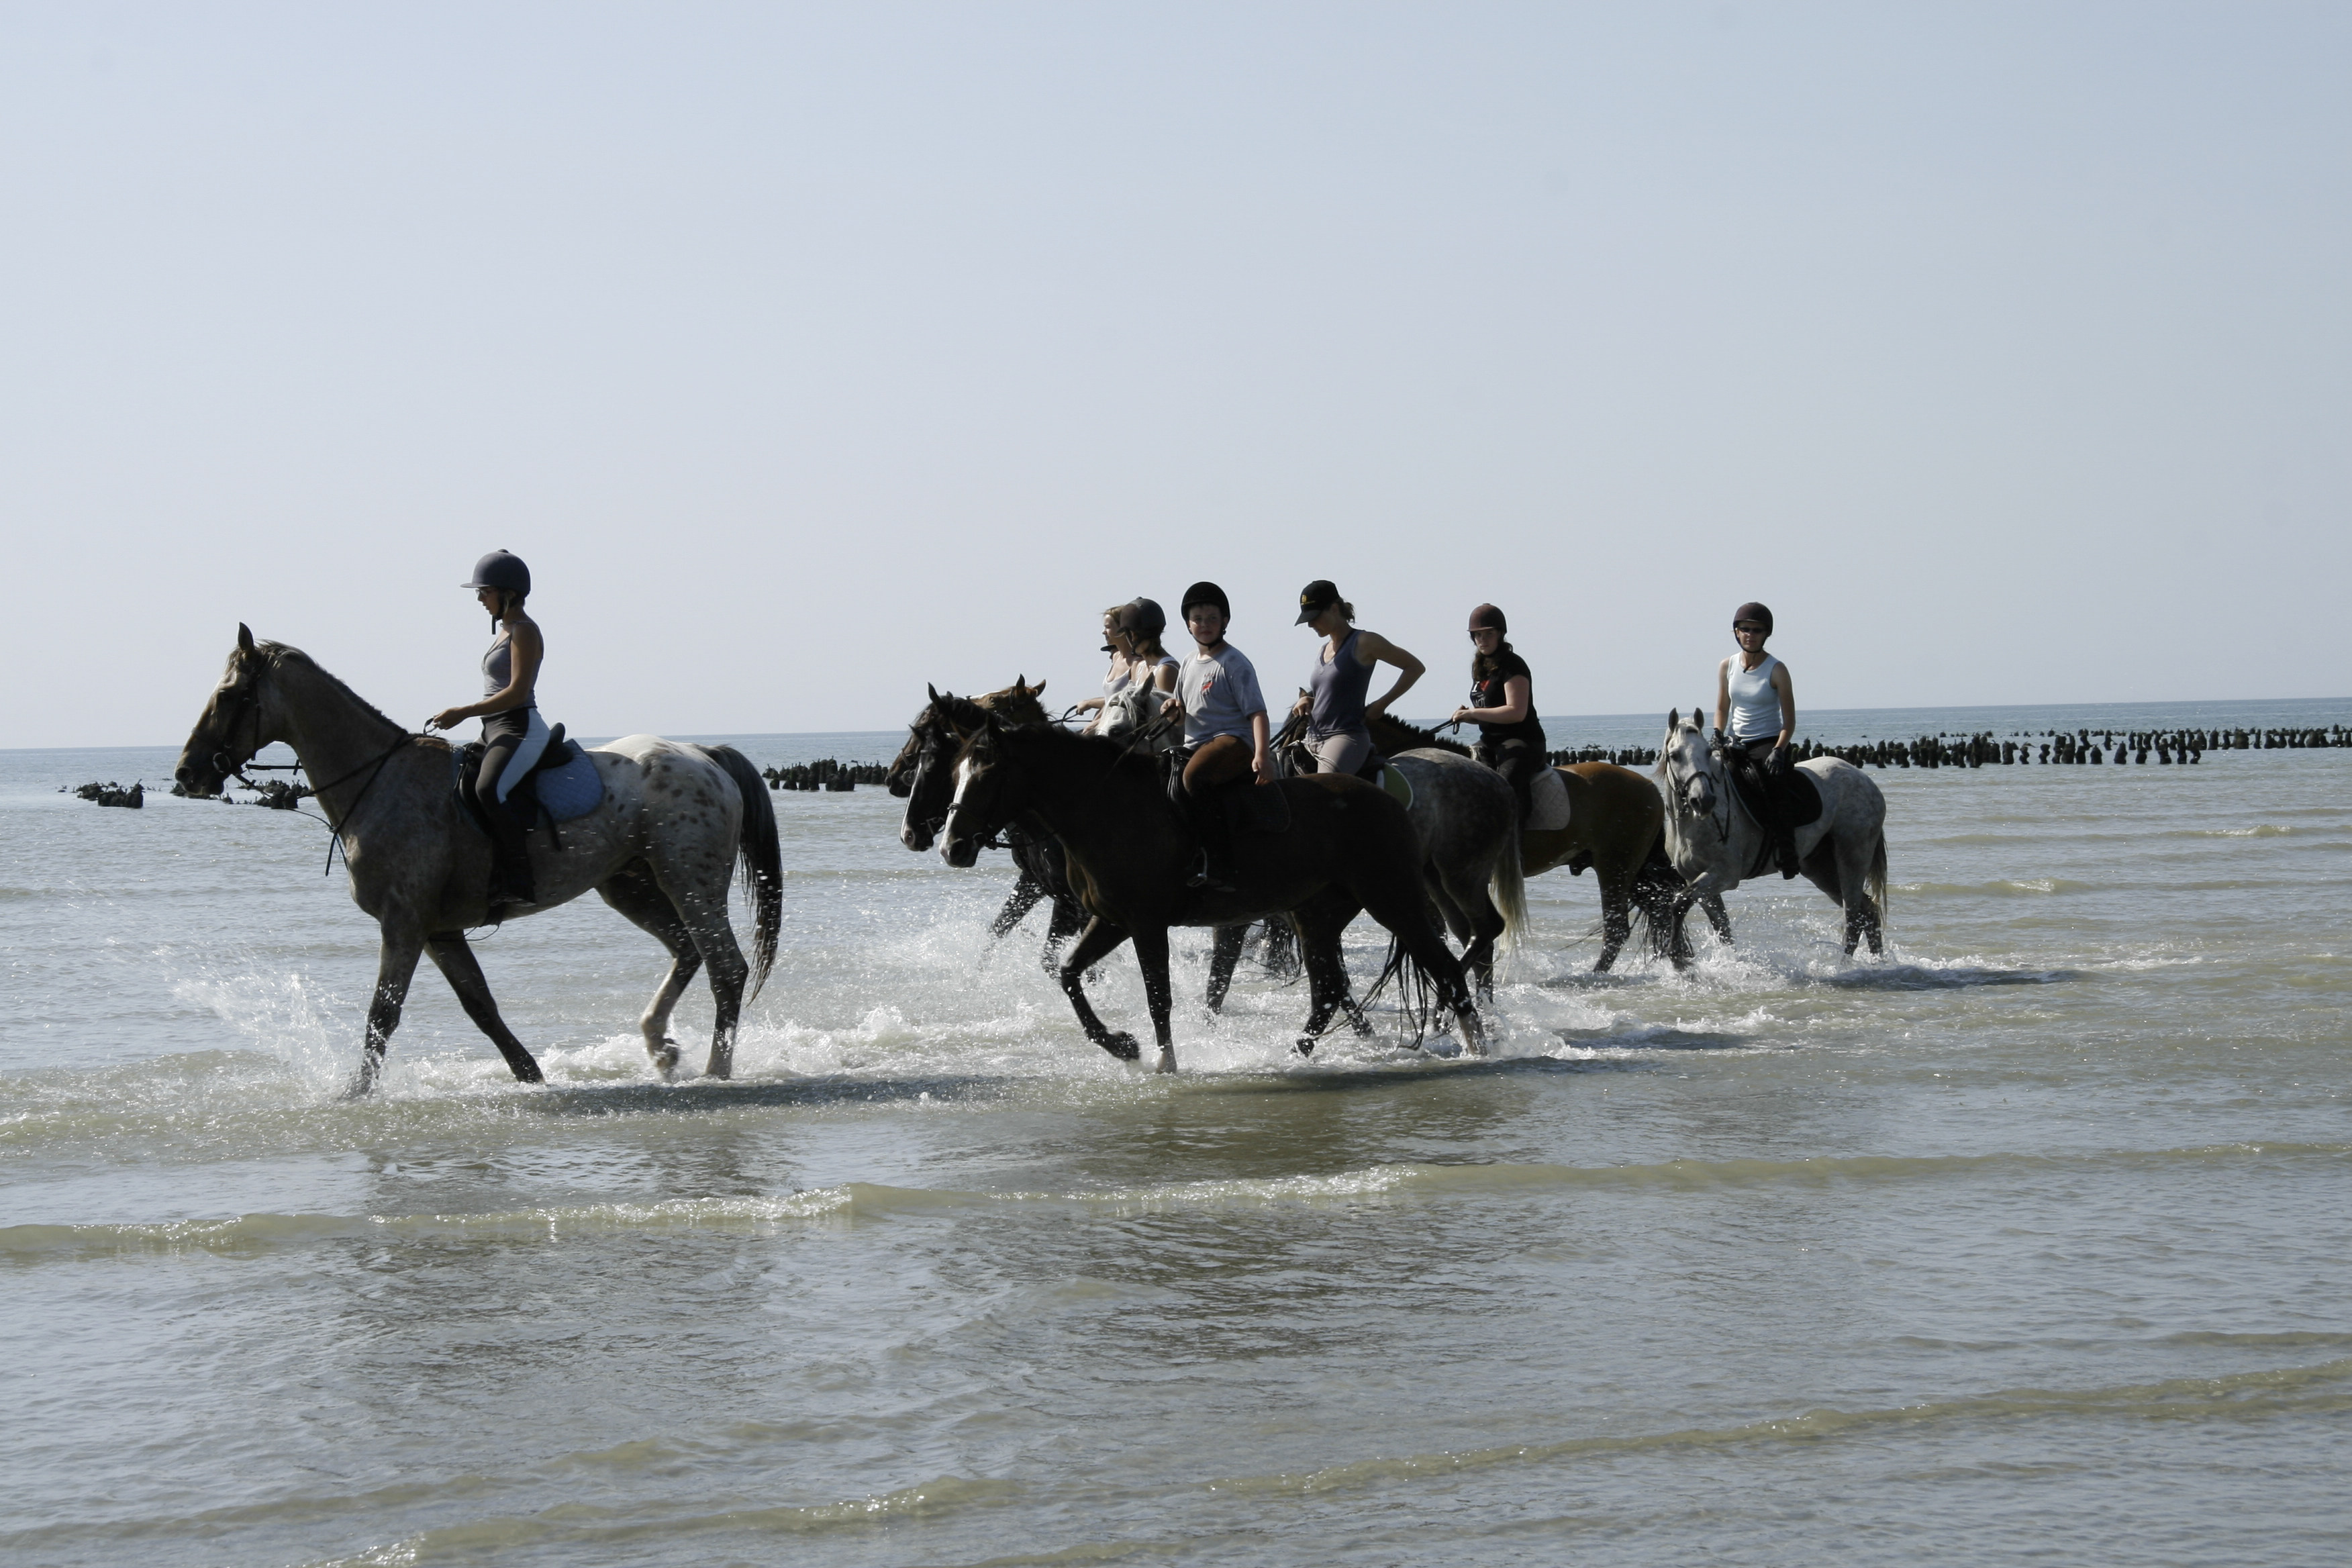 An early morning horseback ride through the bay of the Somme is a typical activity in the French region famed for its World War I battle. Photo: John Brunton